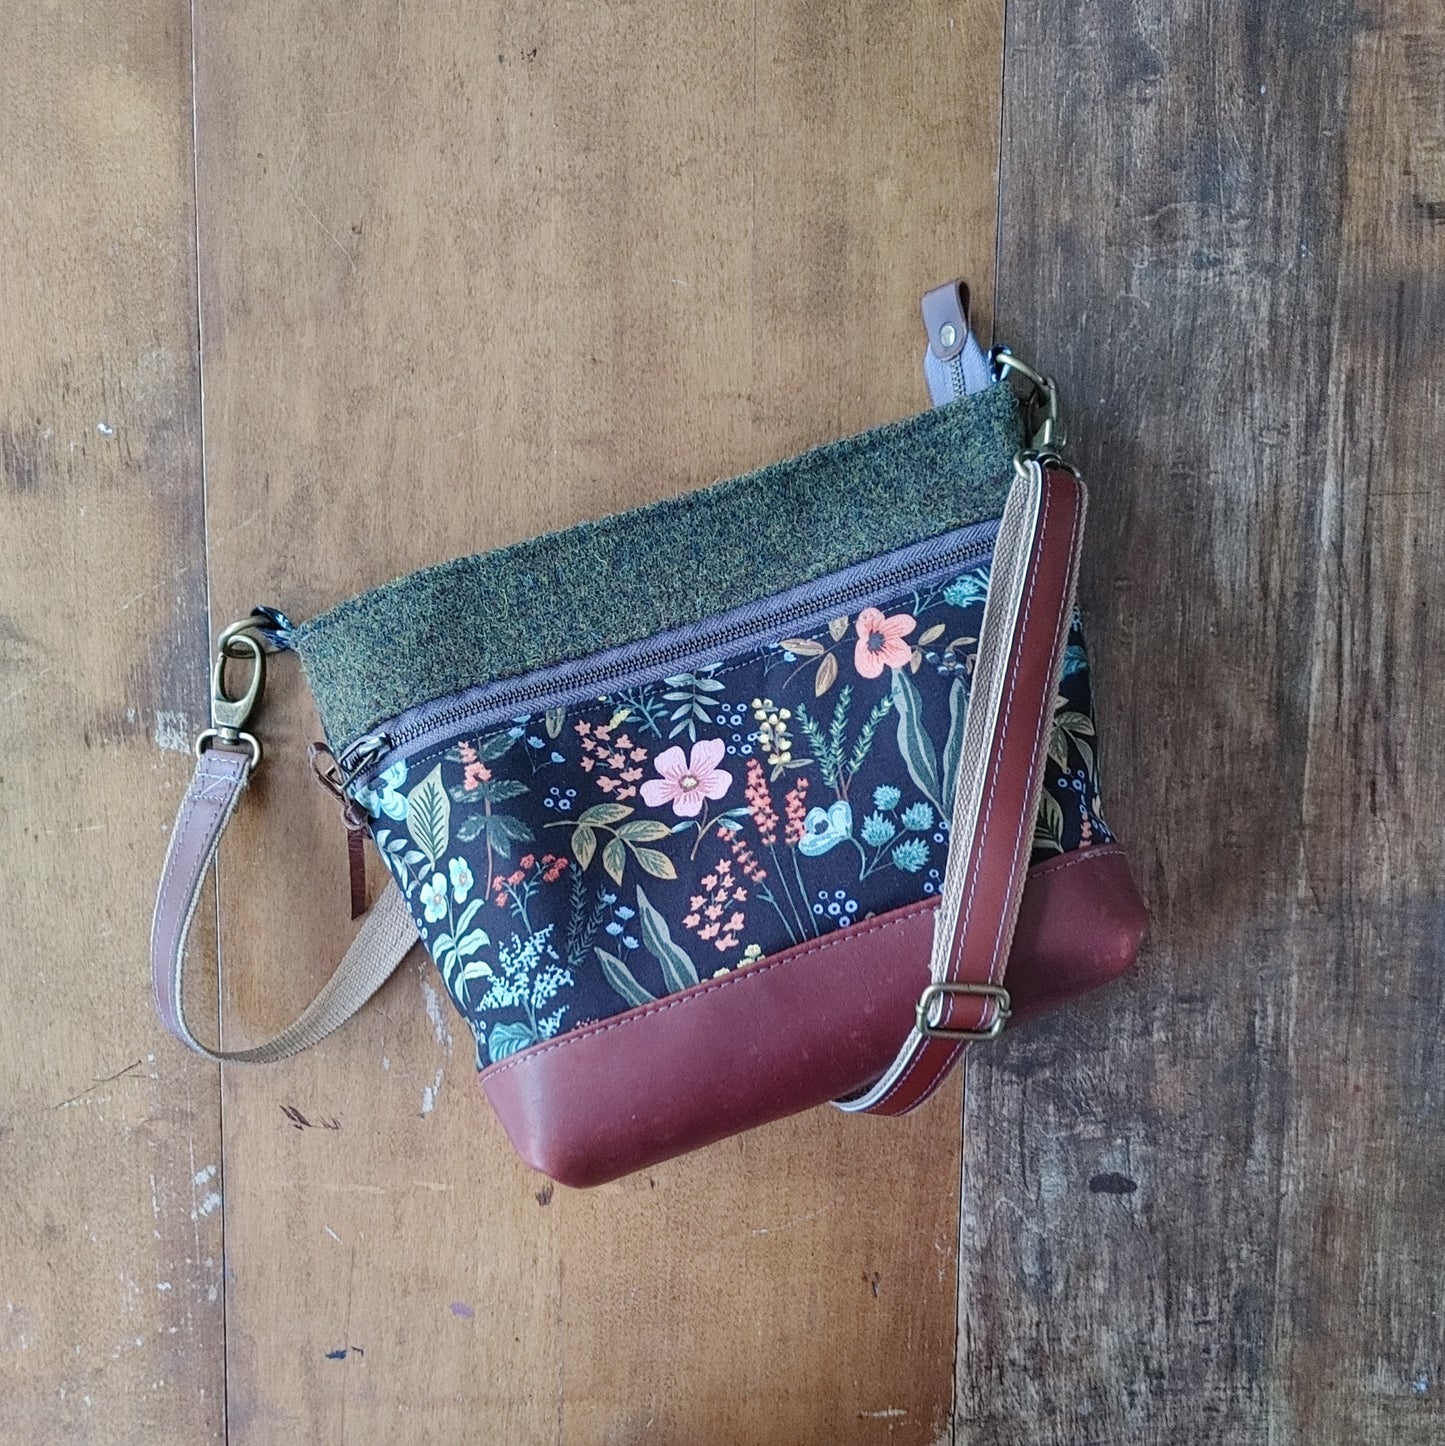 Crossbody Bag in Leather, Floral Canvas and Harris Tweed.